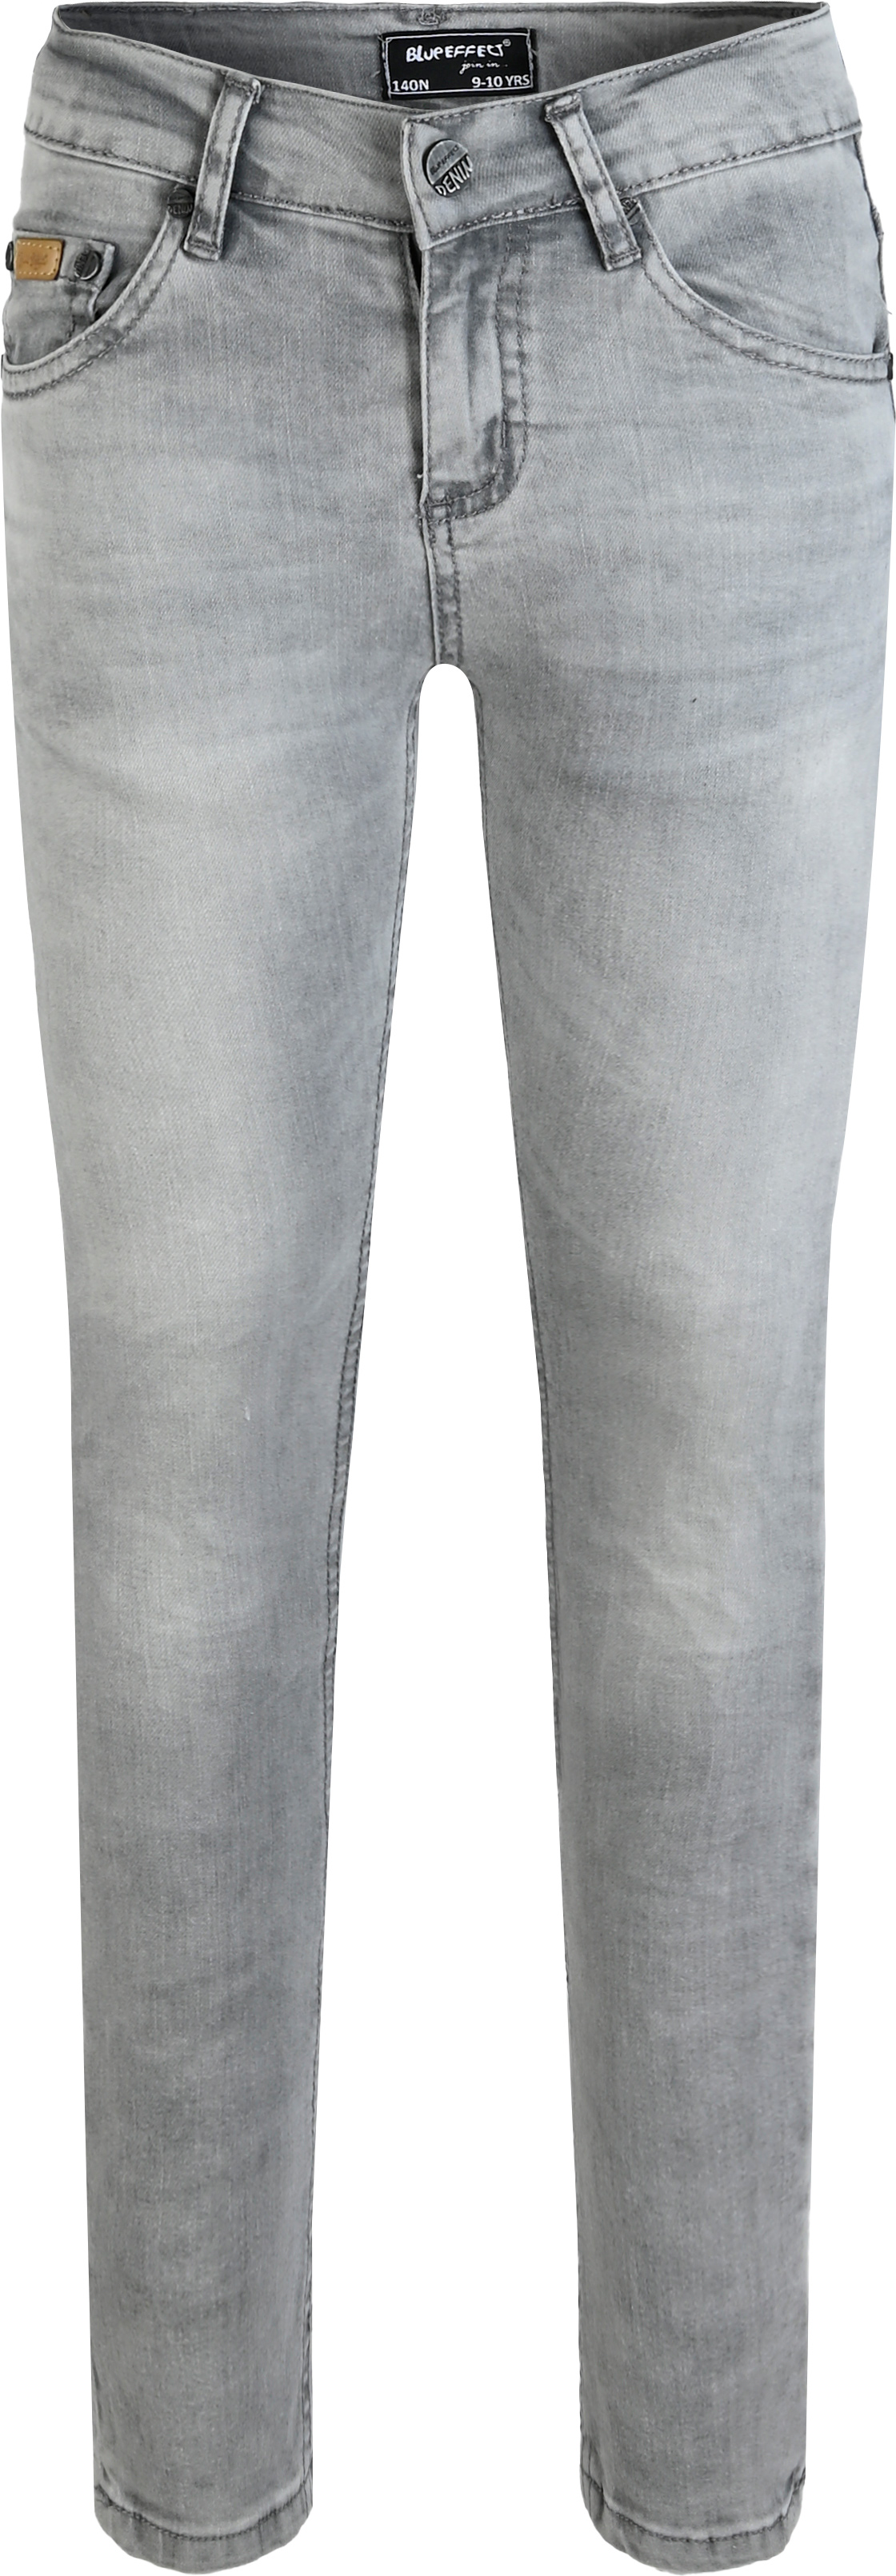 2825-Boys Special Skinny Jeans Ultrastretch, available in Slim,Normal